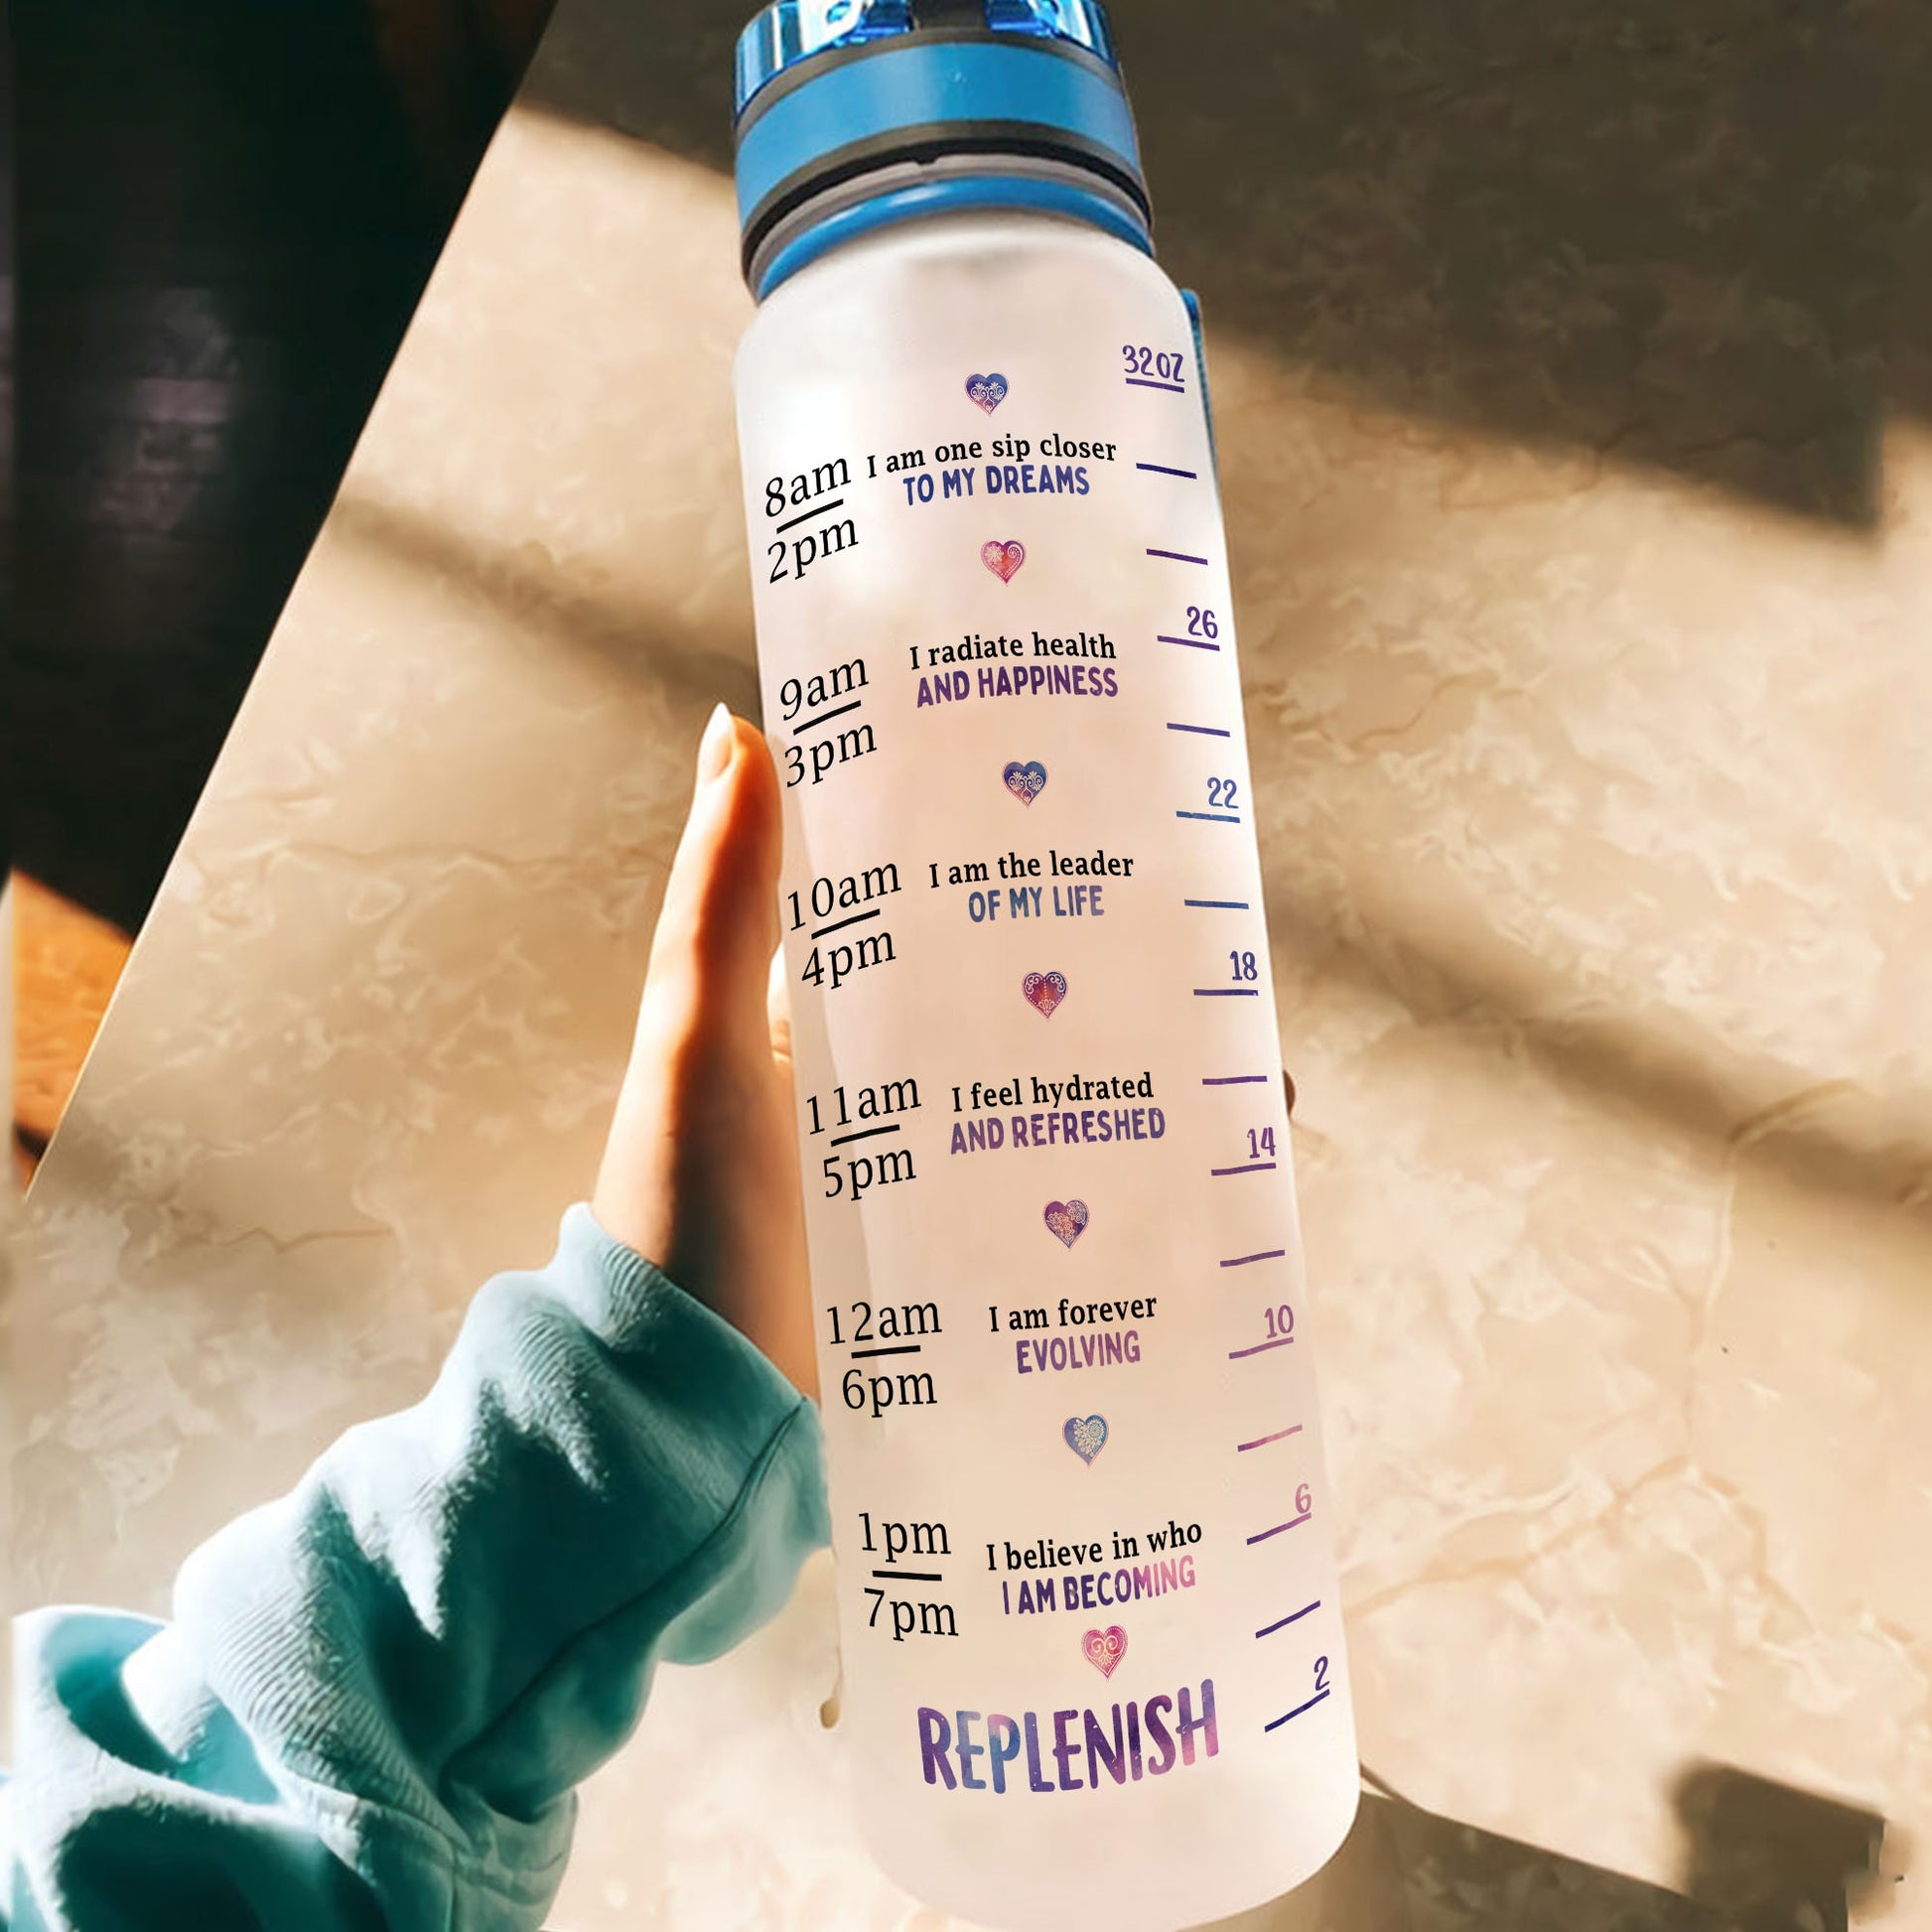 Personalized Female Gymer Water Bottle - My Daily Workout